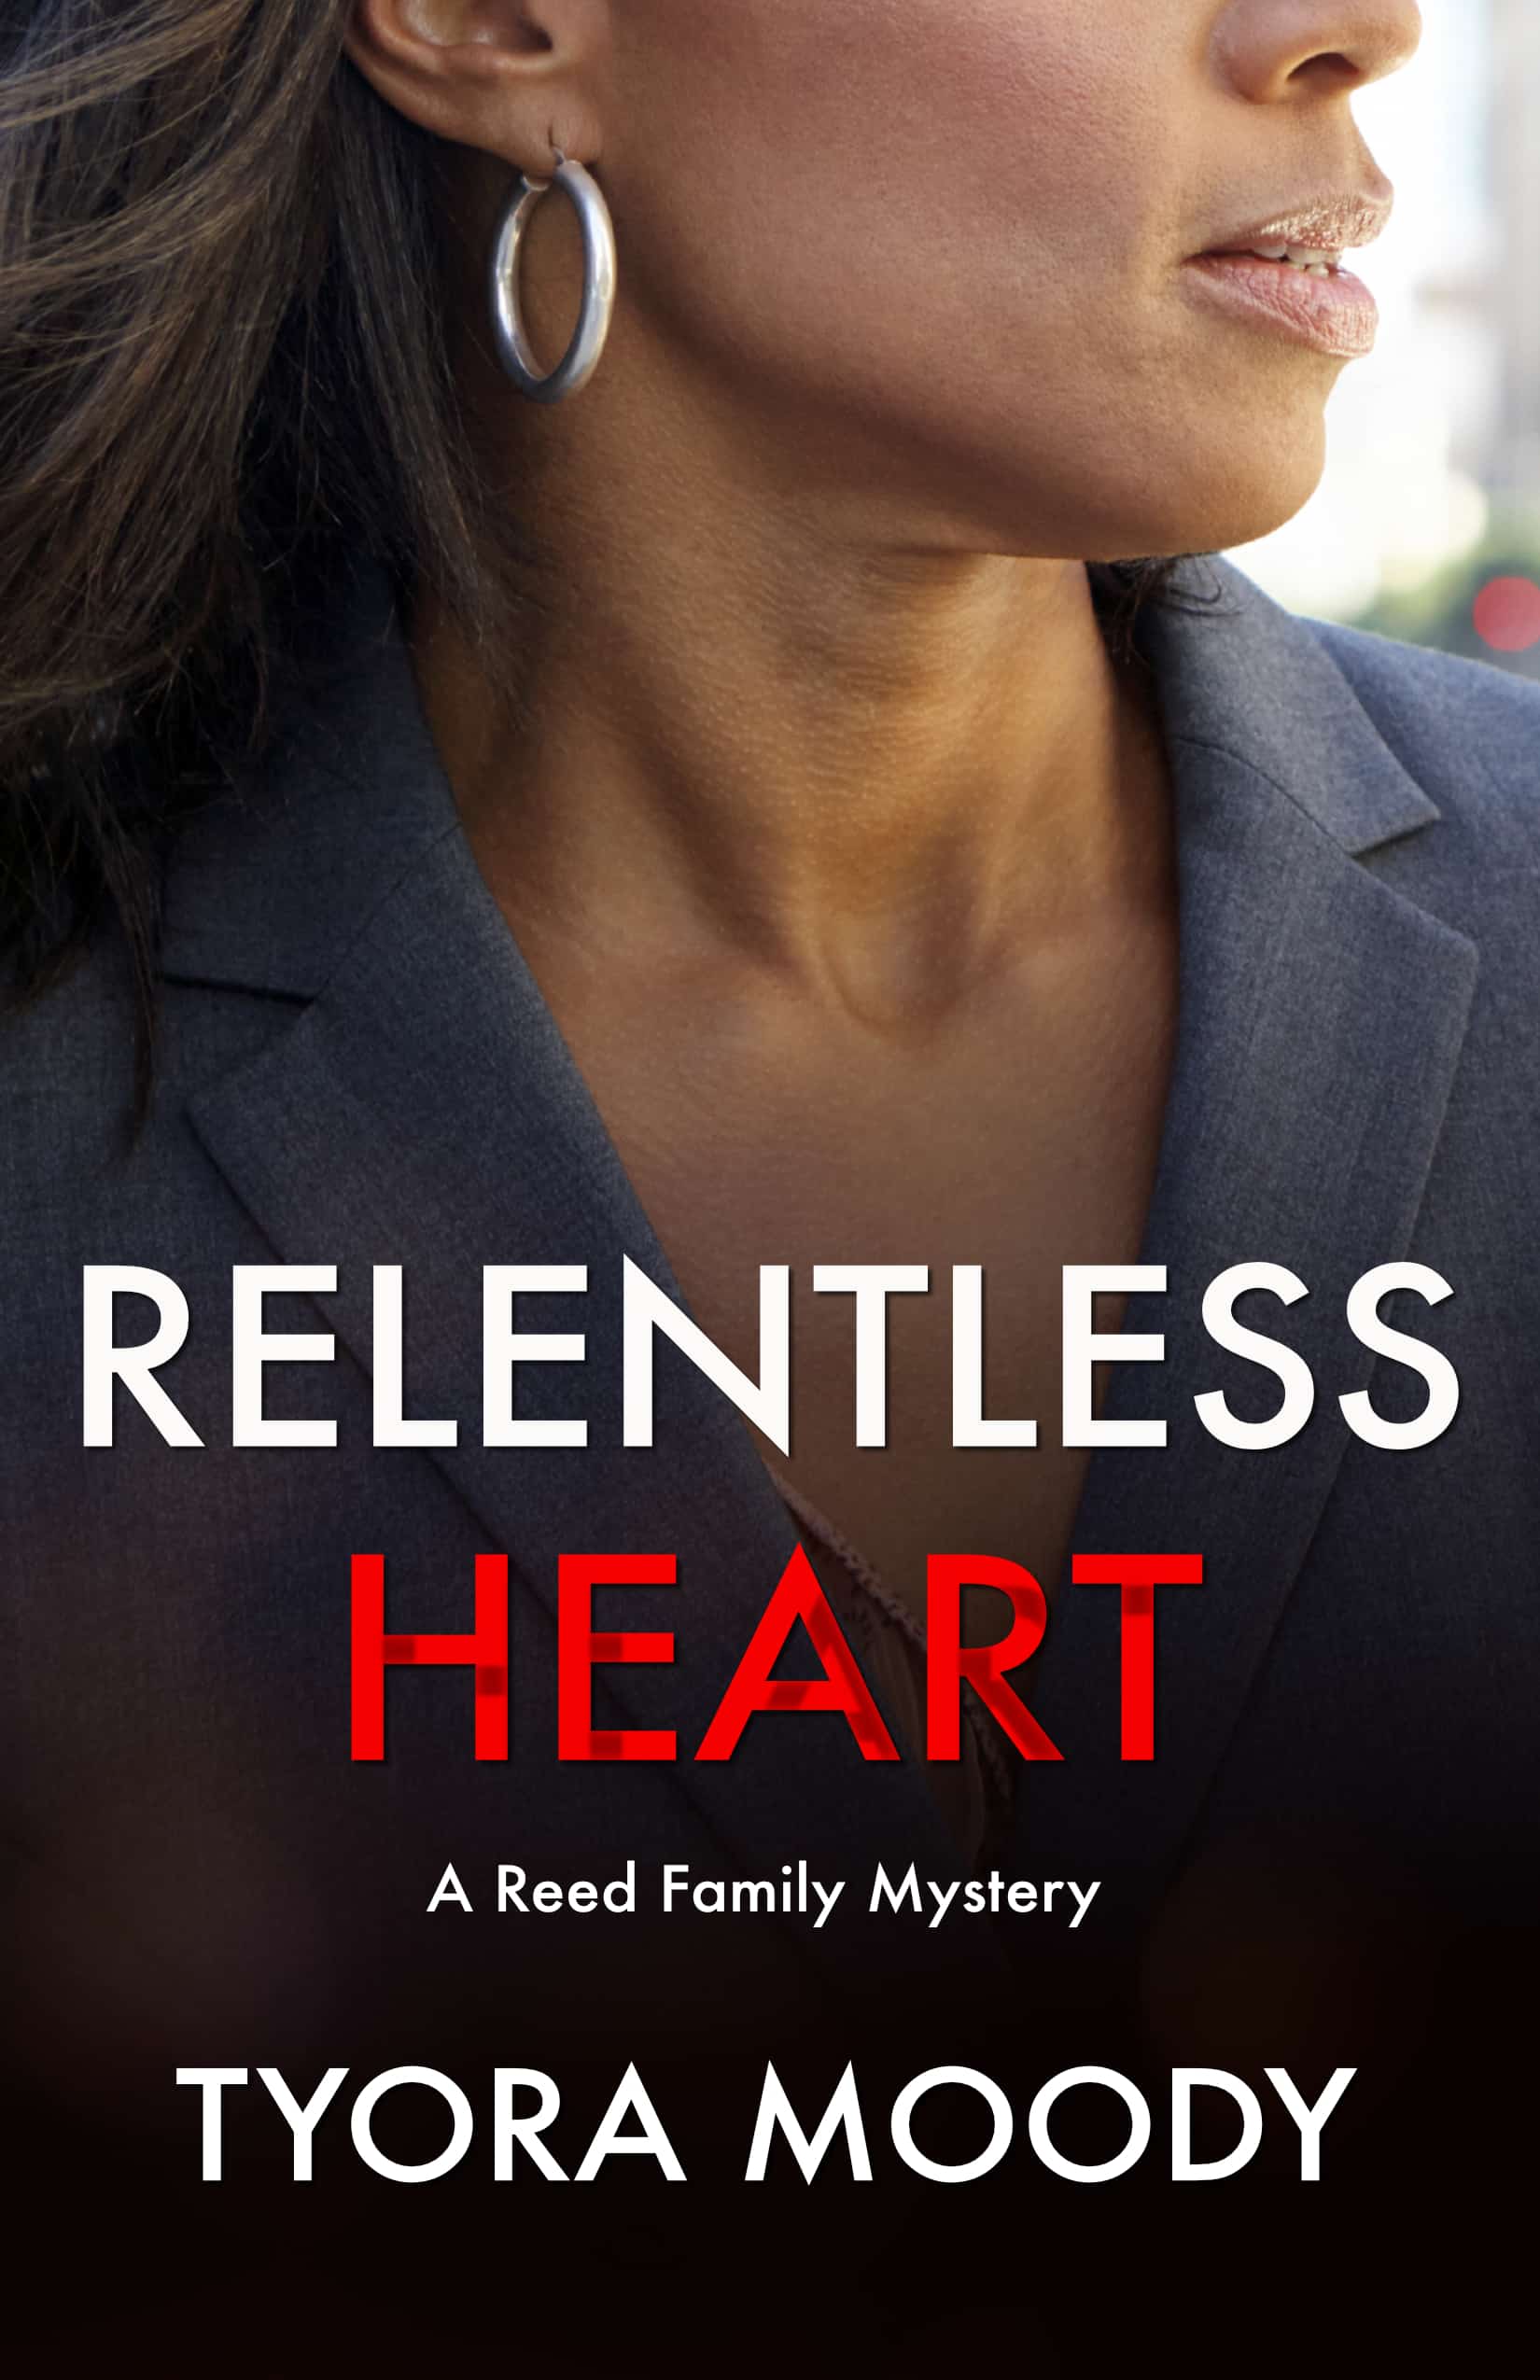 Relentless Heart, Reed Family Mysteries, Book 3